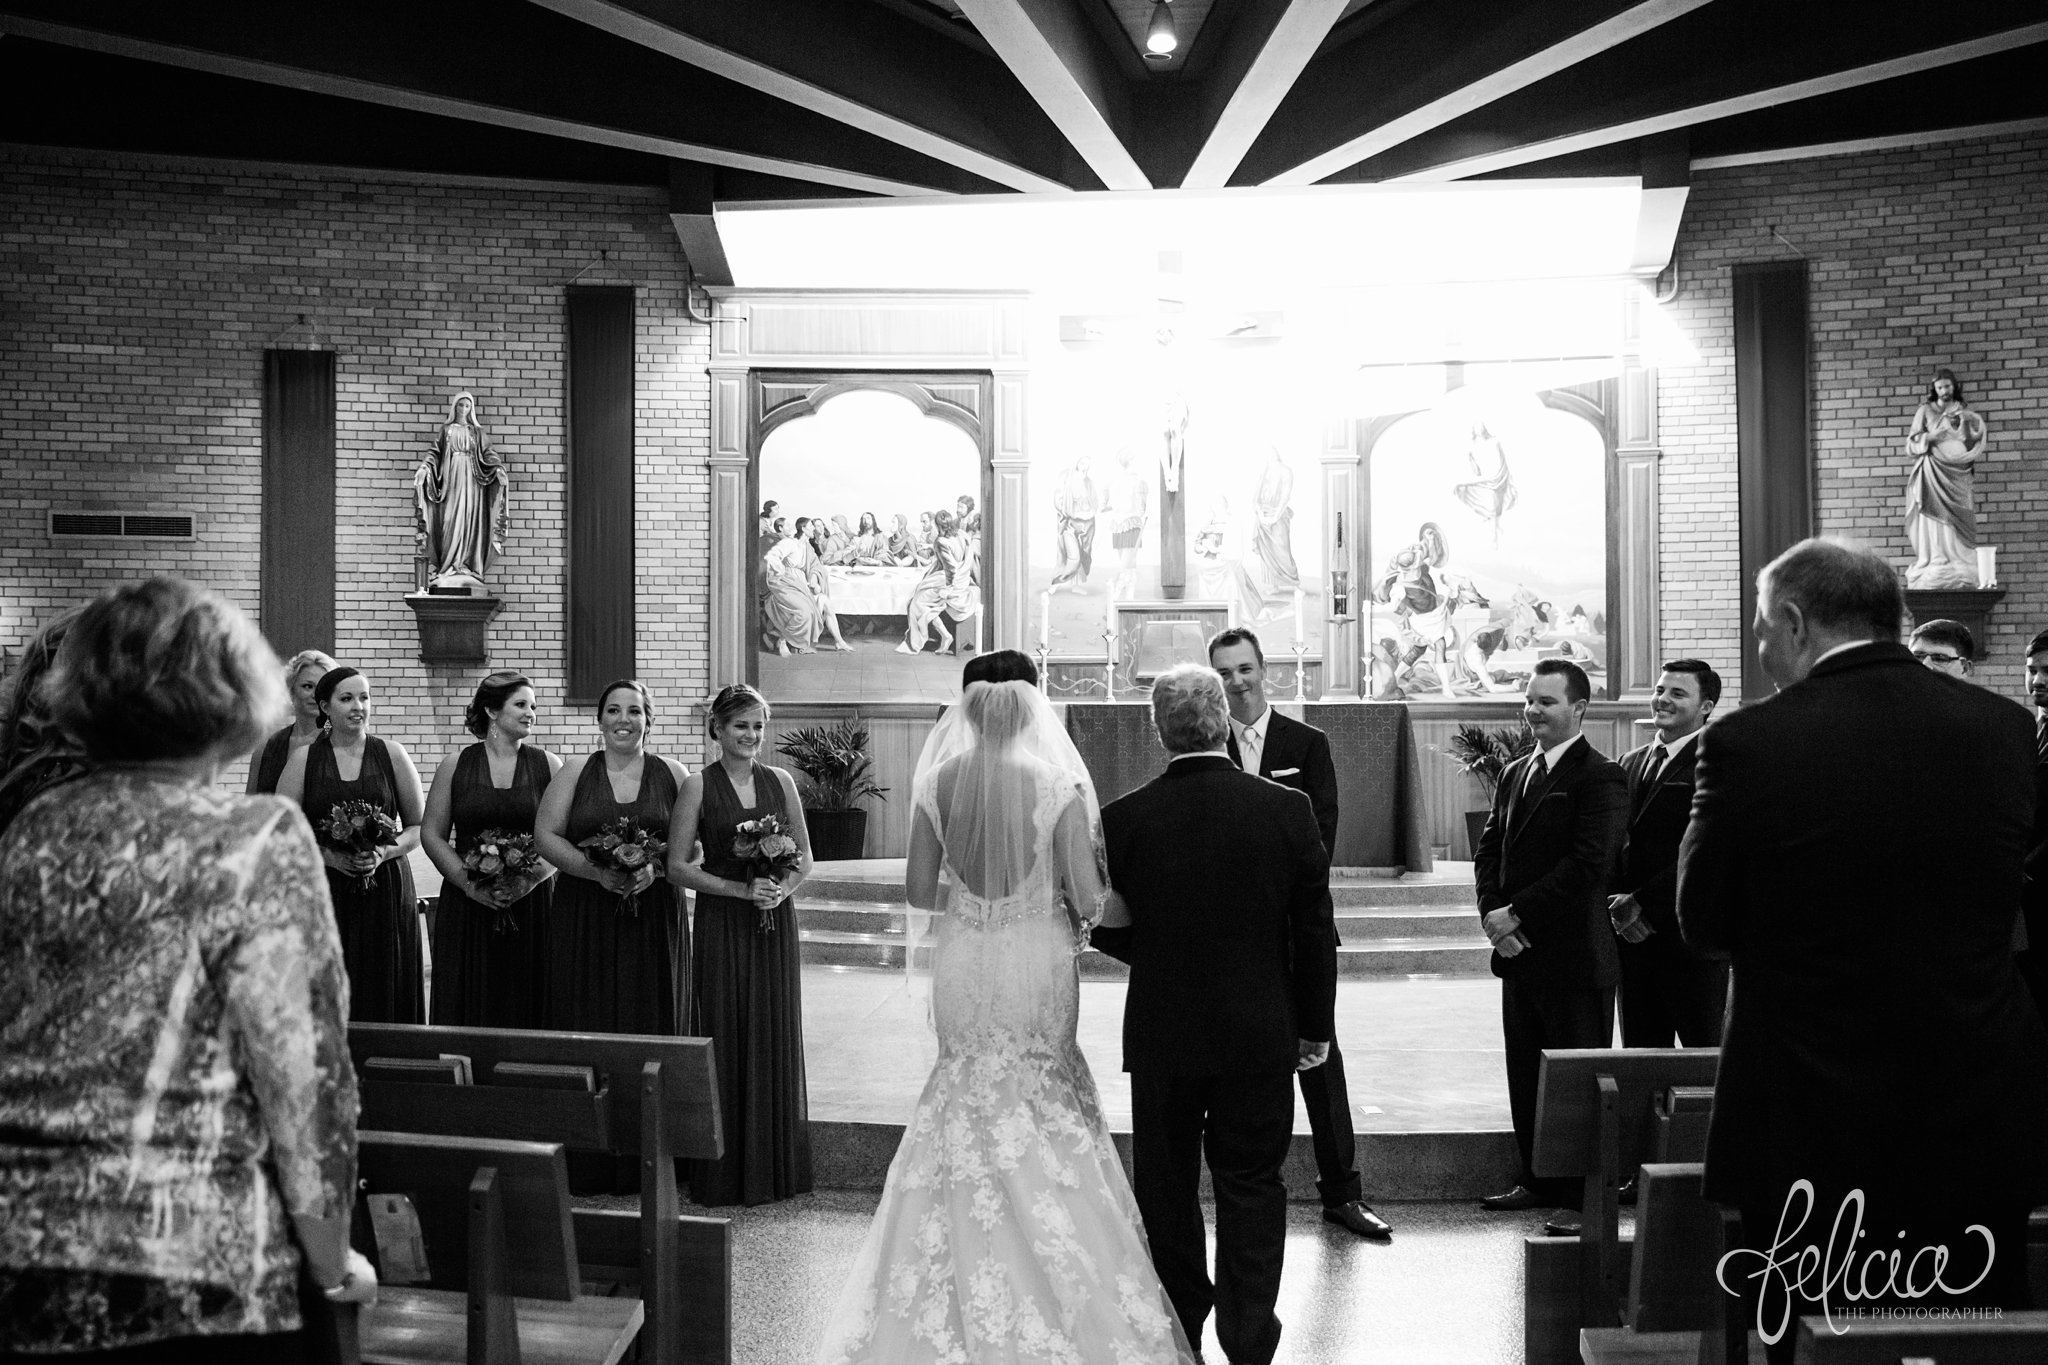 Black and White | Wedding | Wedding Photography | Wedding Photos | Felicia the Photographer | Images by feliciathephotographer.com | Travel Photographer | Duluth | St. Benedict Church | Catholic Ceremony | Wedding Ceremony | Sun Flare | Here Comes the Bride | Walking Down the Aisle 